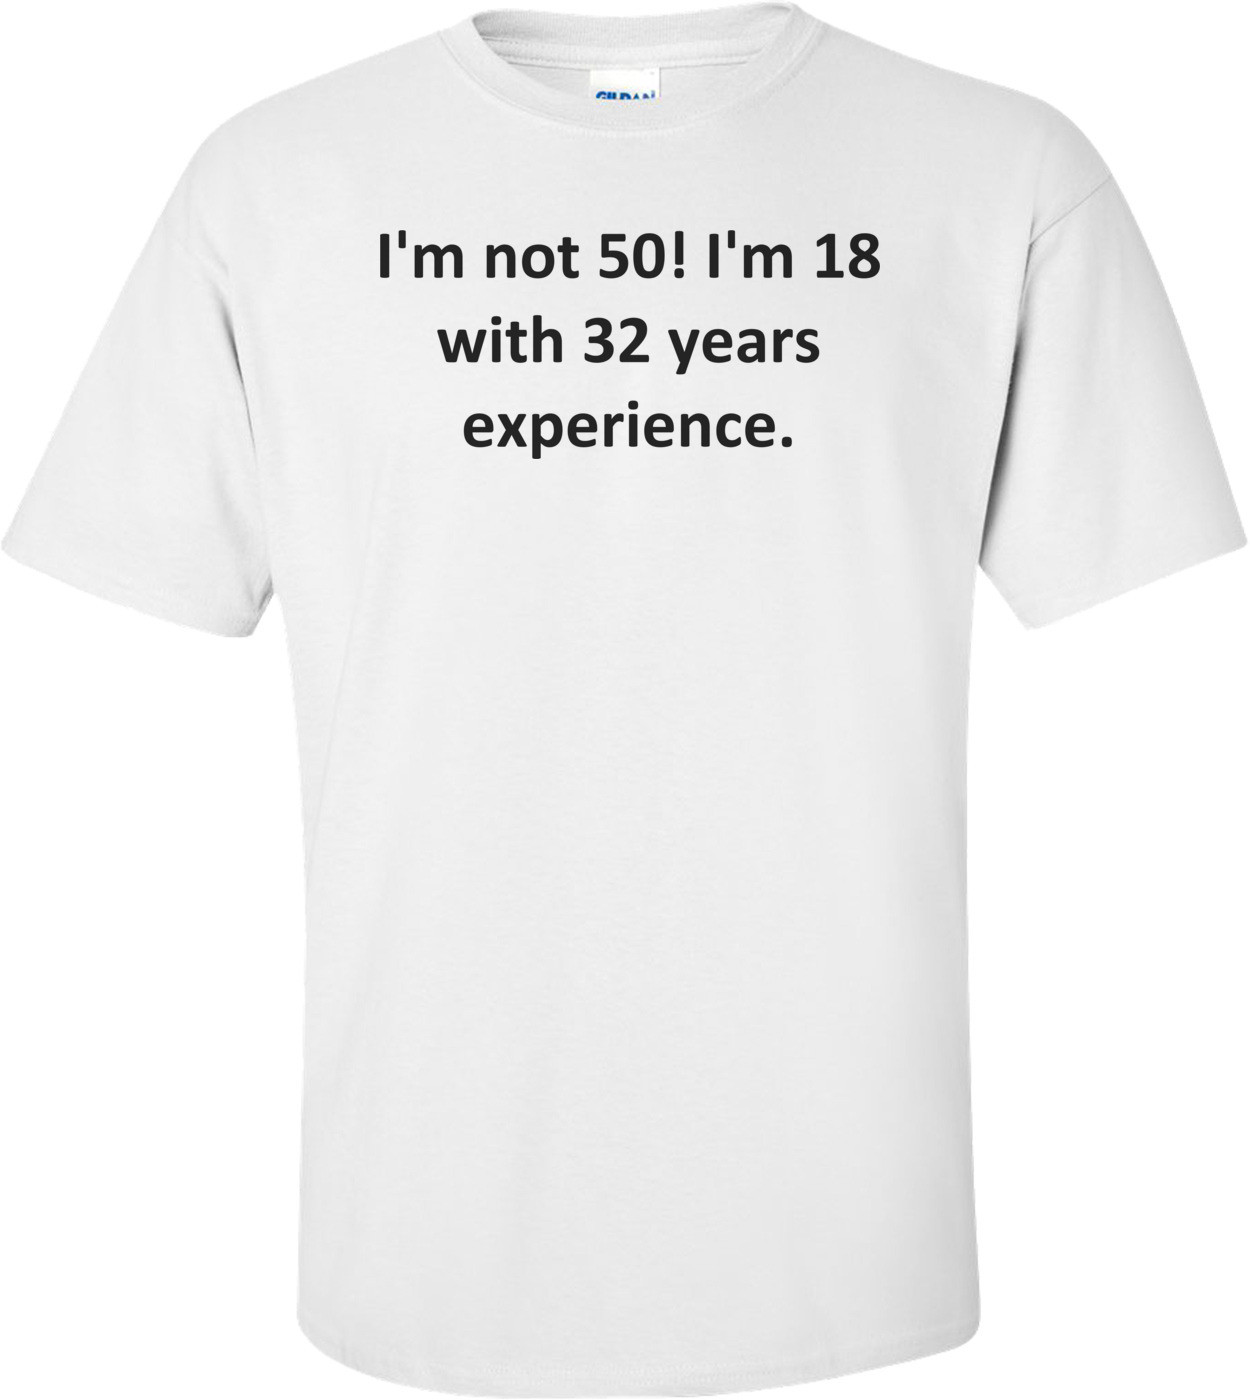 I'm not 50! I'm 18 with 32 years experience.